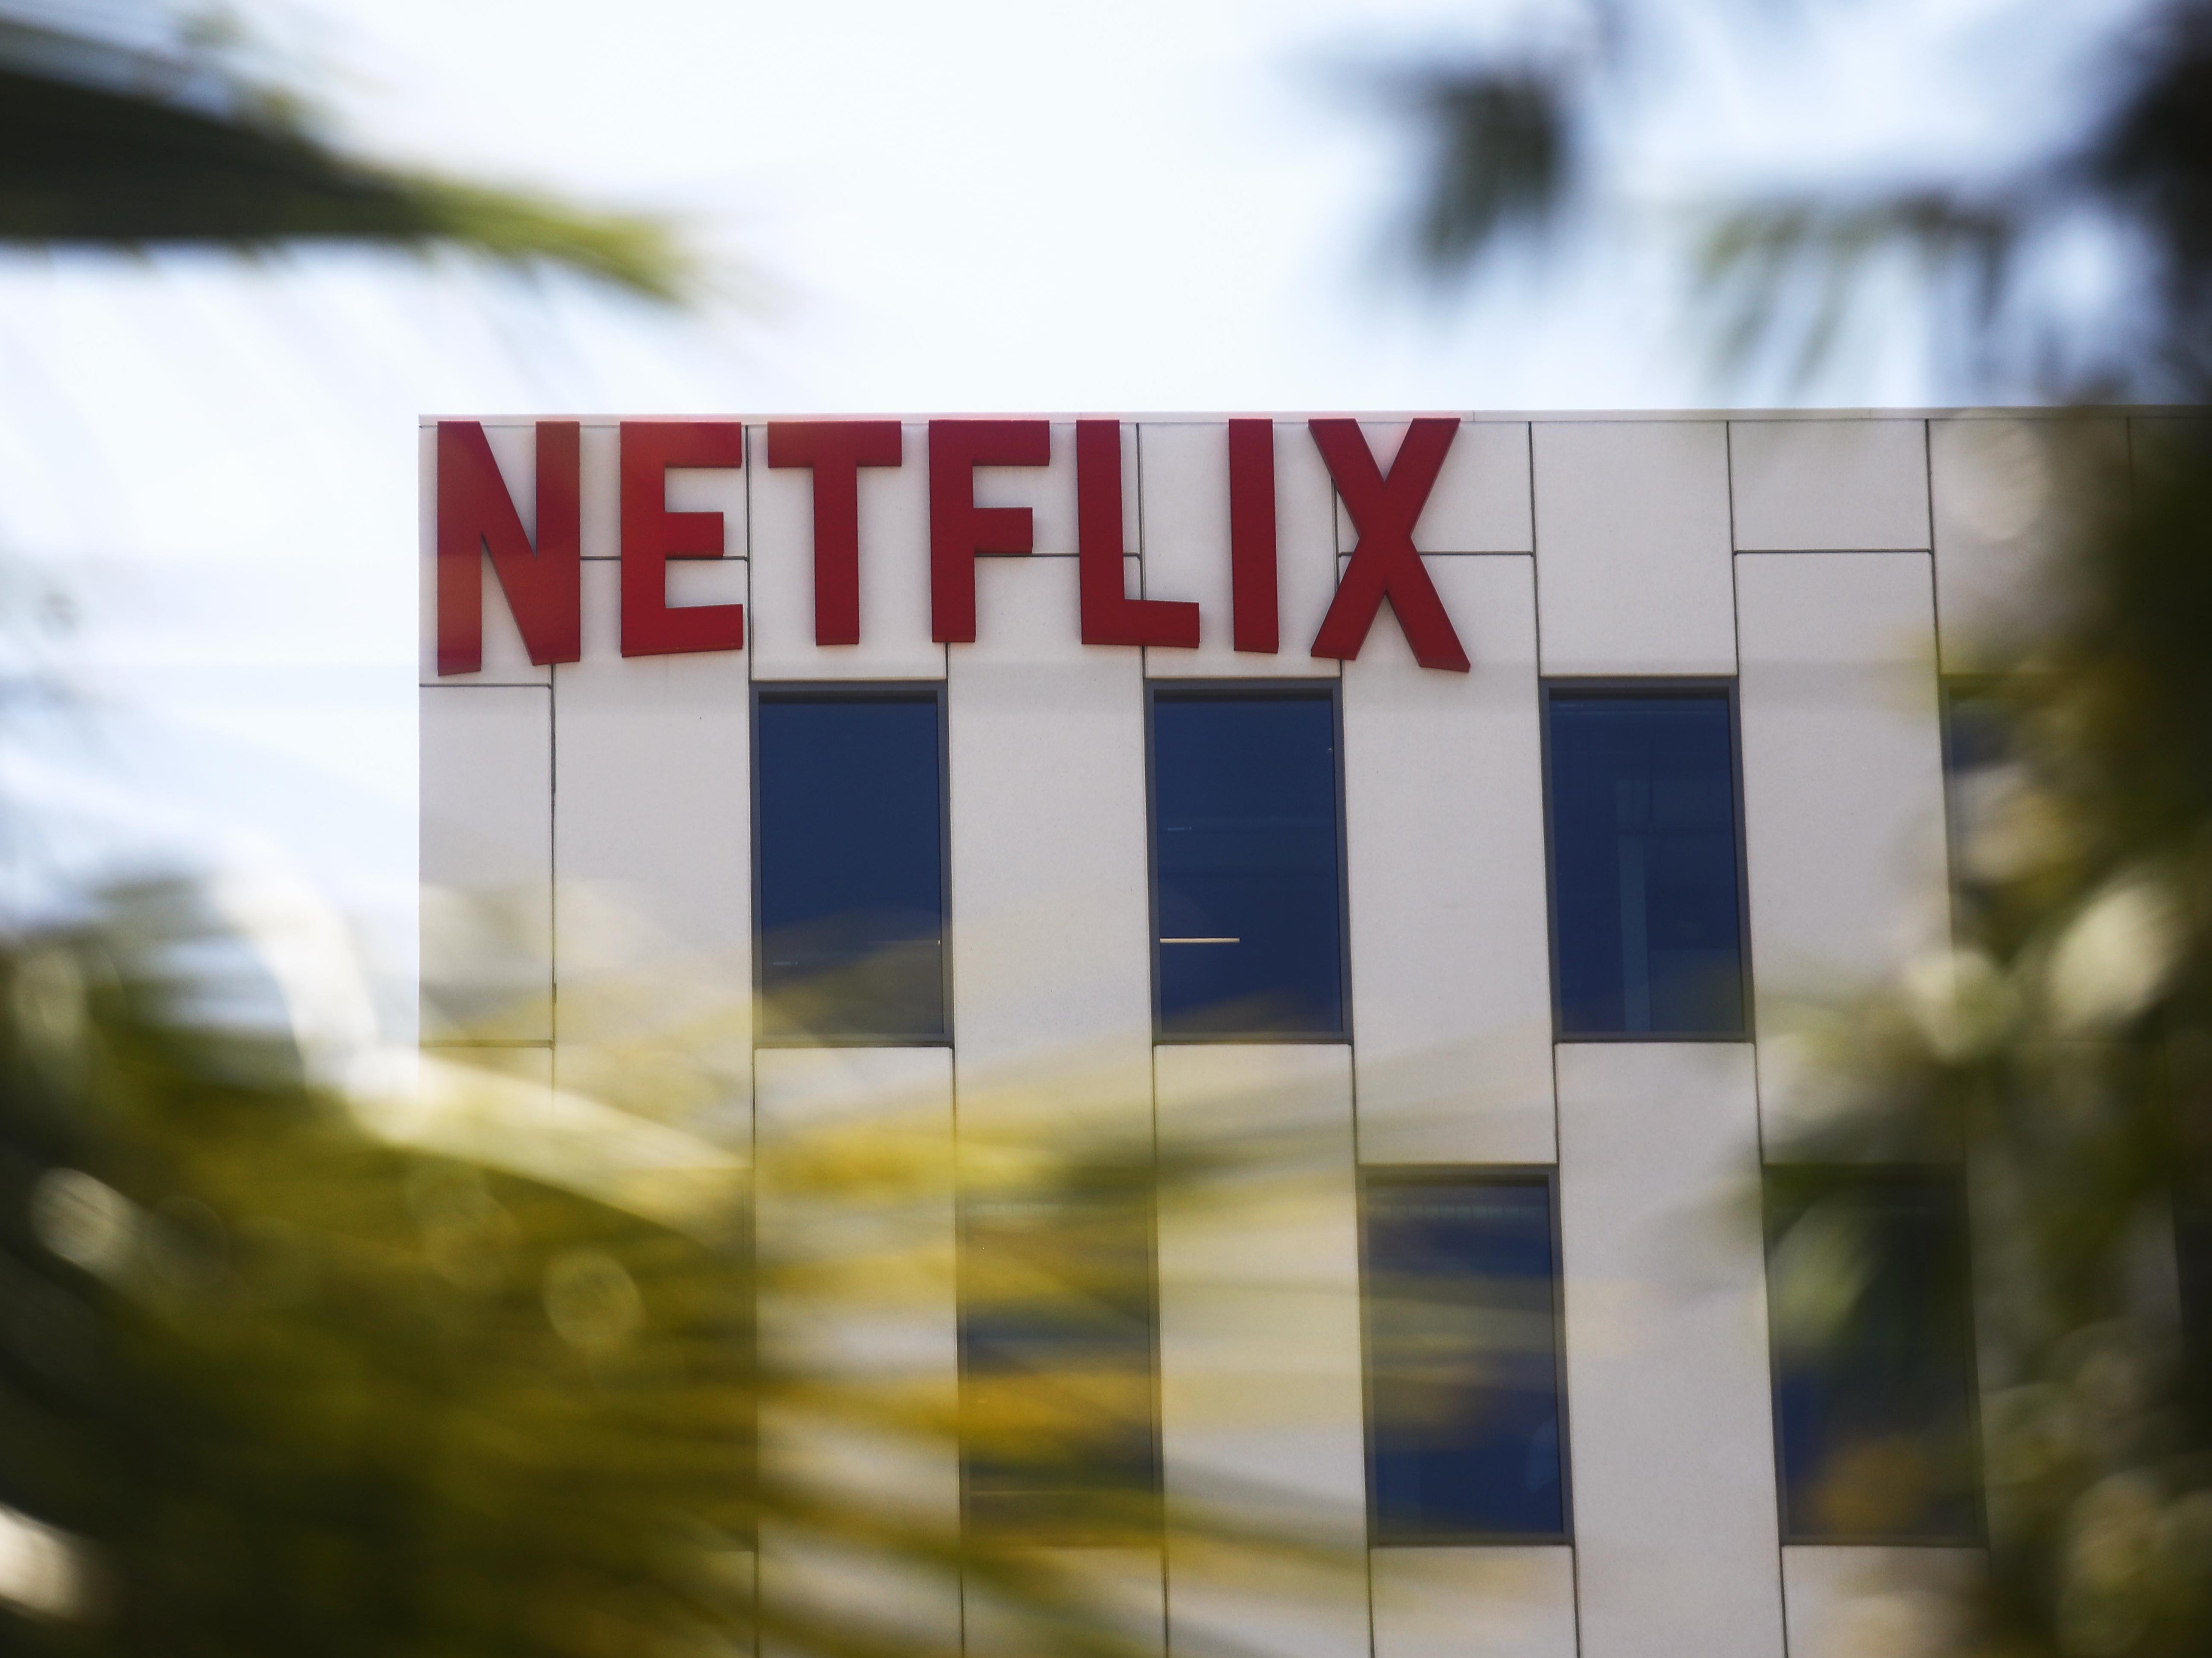 The Netflix logo is displayed at Netflix offices on Sunset Boulevard on 29 May 2019 in Los Angeles, California